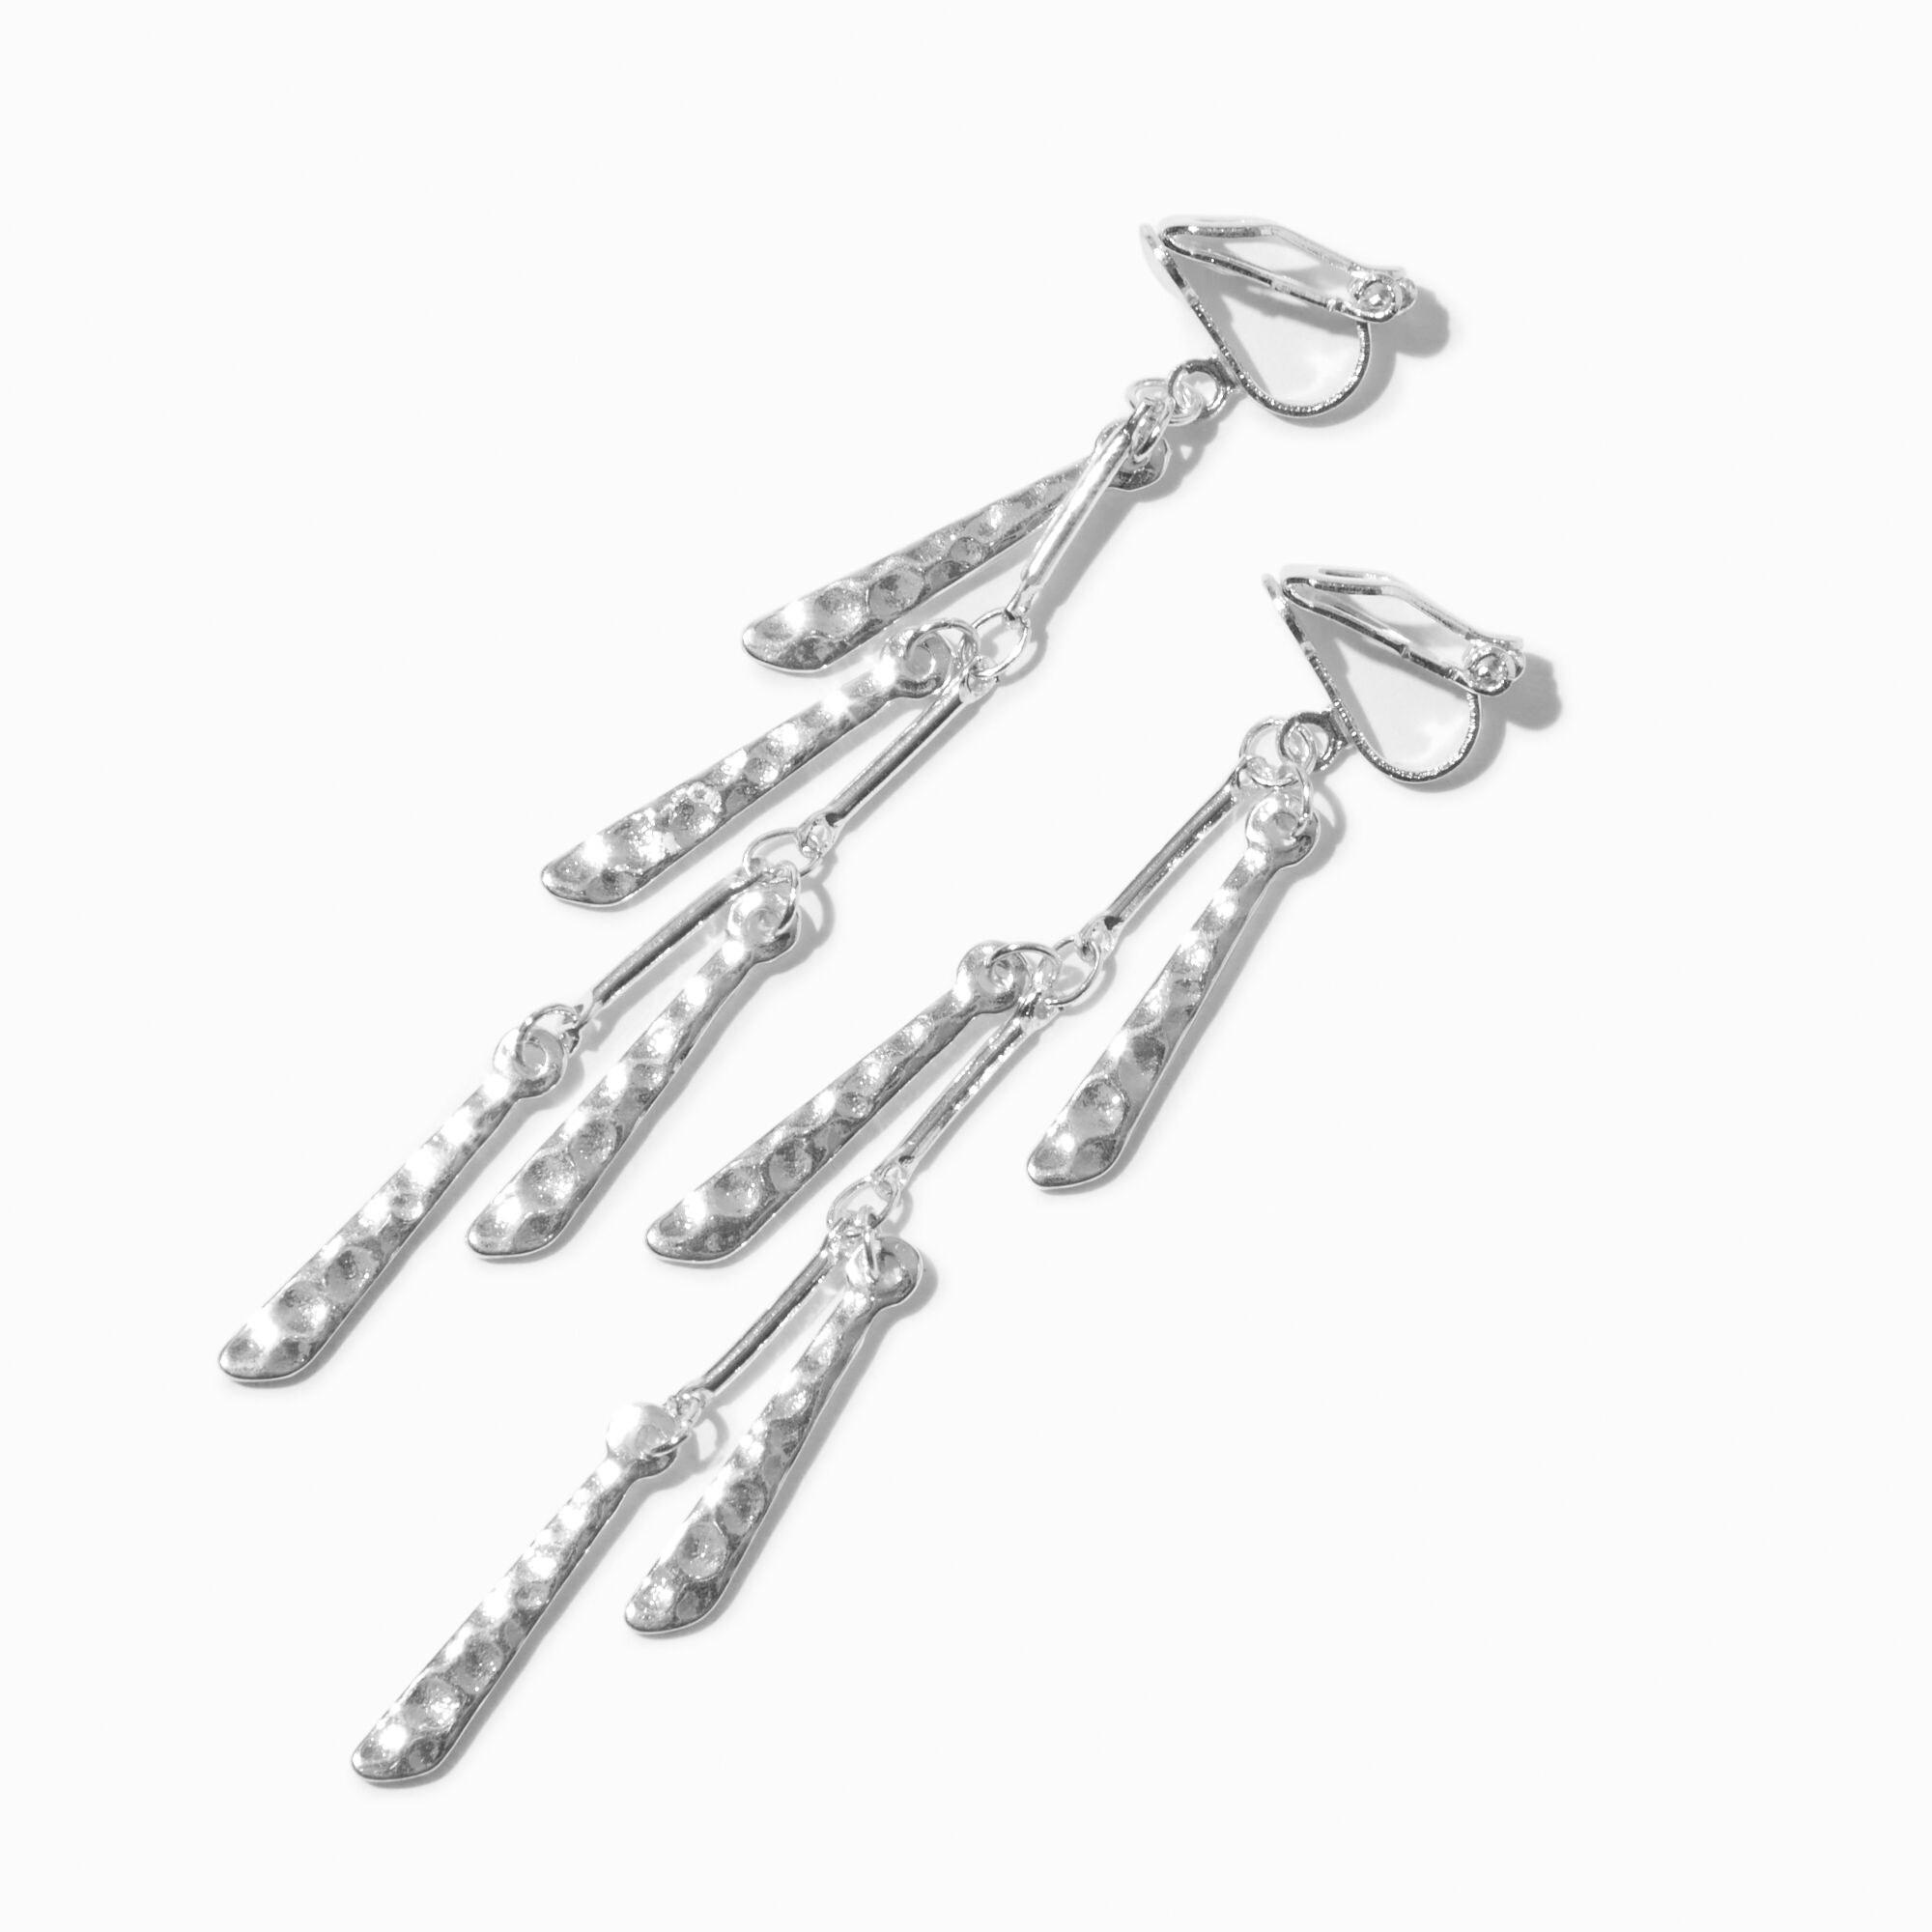 View Claires Tone Hammered Tassel 3 Clip On Drop Earrings Silver information